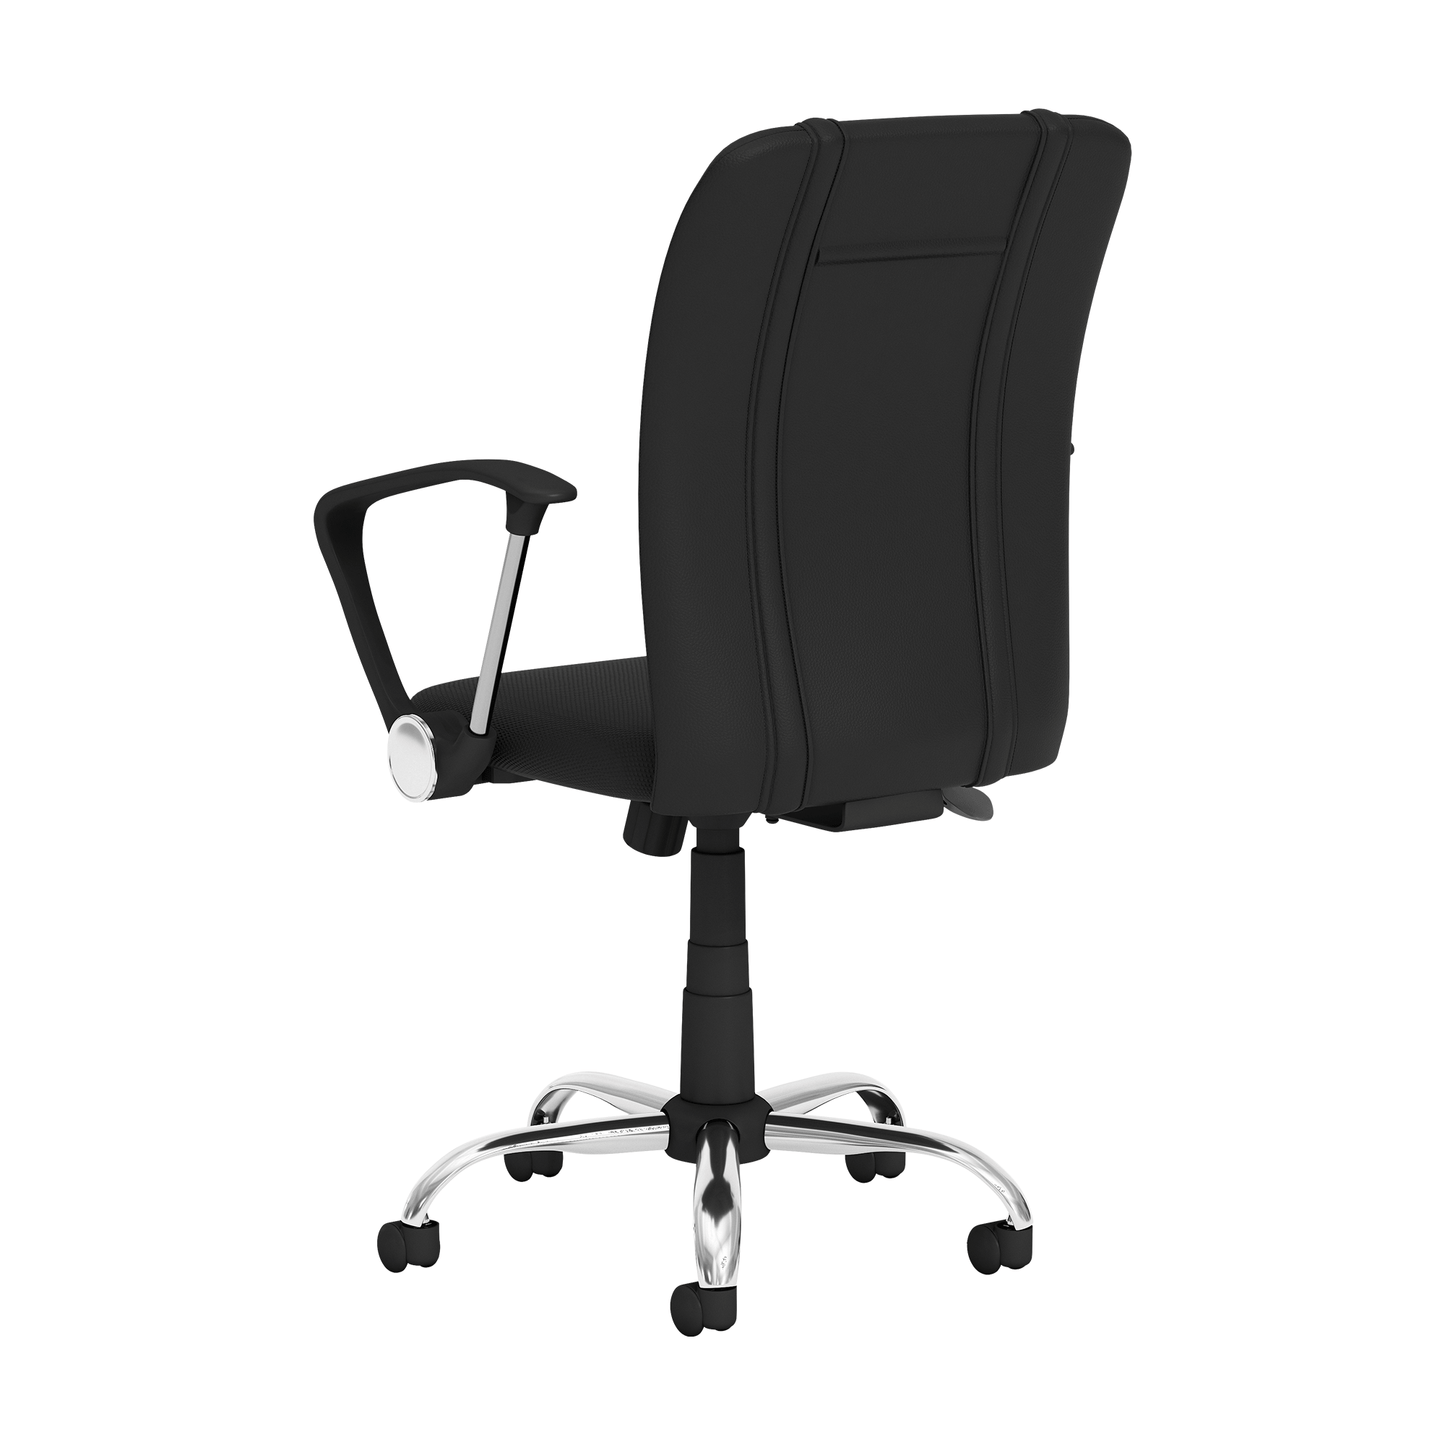 Curve Task Chair with Chevy Trucks logo